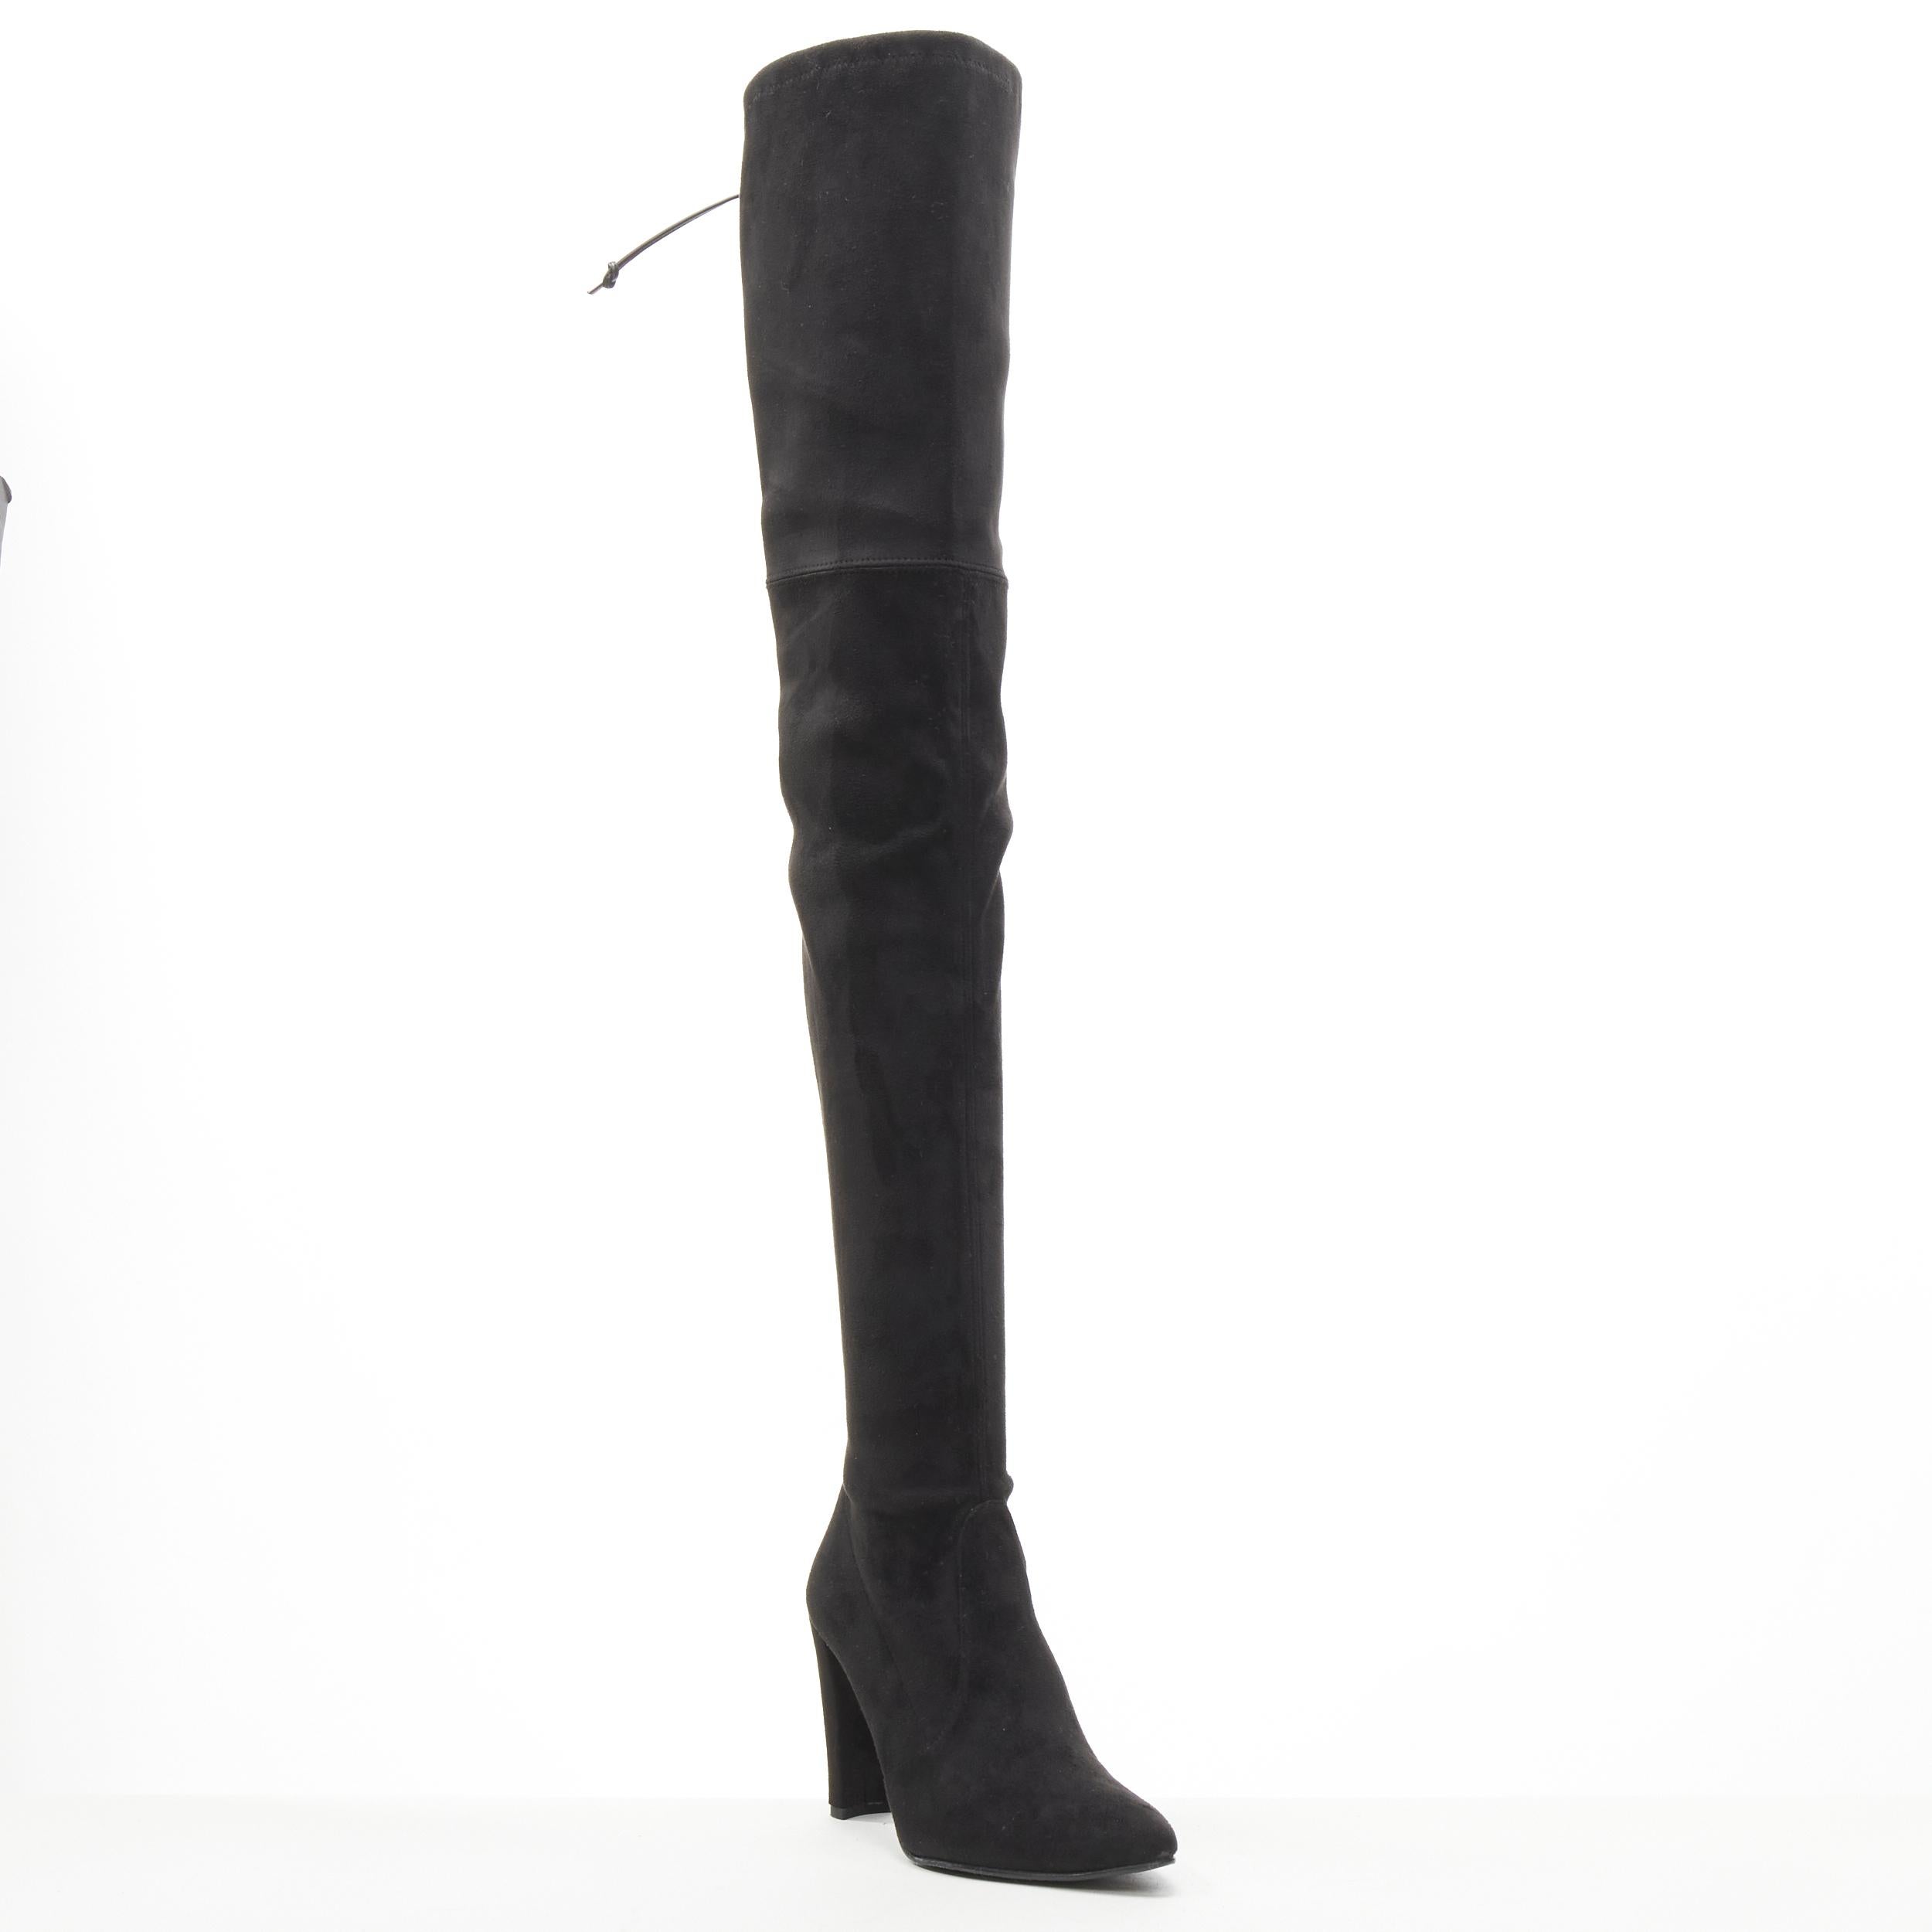 STUART WEITZMAN Highland black stretch suede over knee high heel boots EU37.5 
Reference: LNKO/A01931 
Brand: Stuart Weitzman 
Material: Suede 
Color: Black 
Pattern: Solid 
Extra Detail: Stretch suede leather. Leather tie detail at opening. Chunky